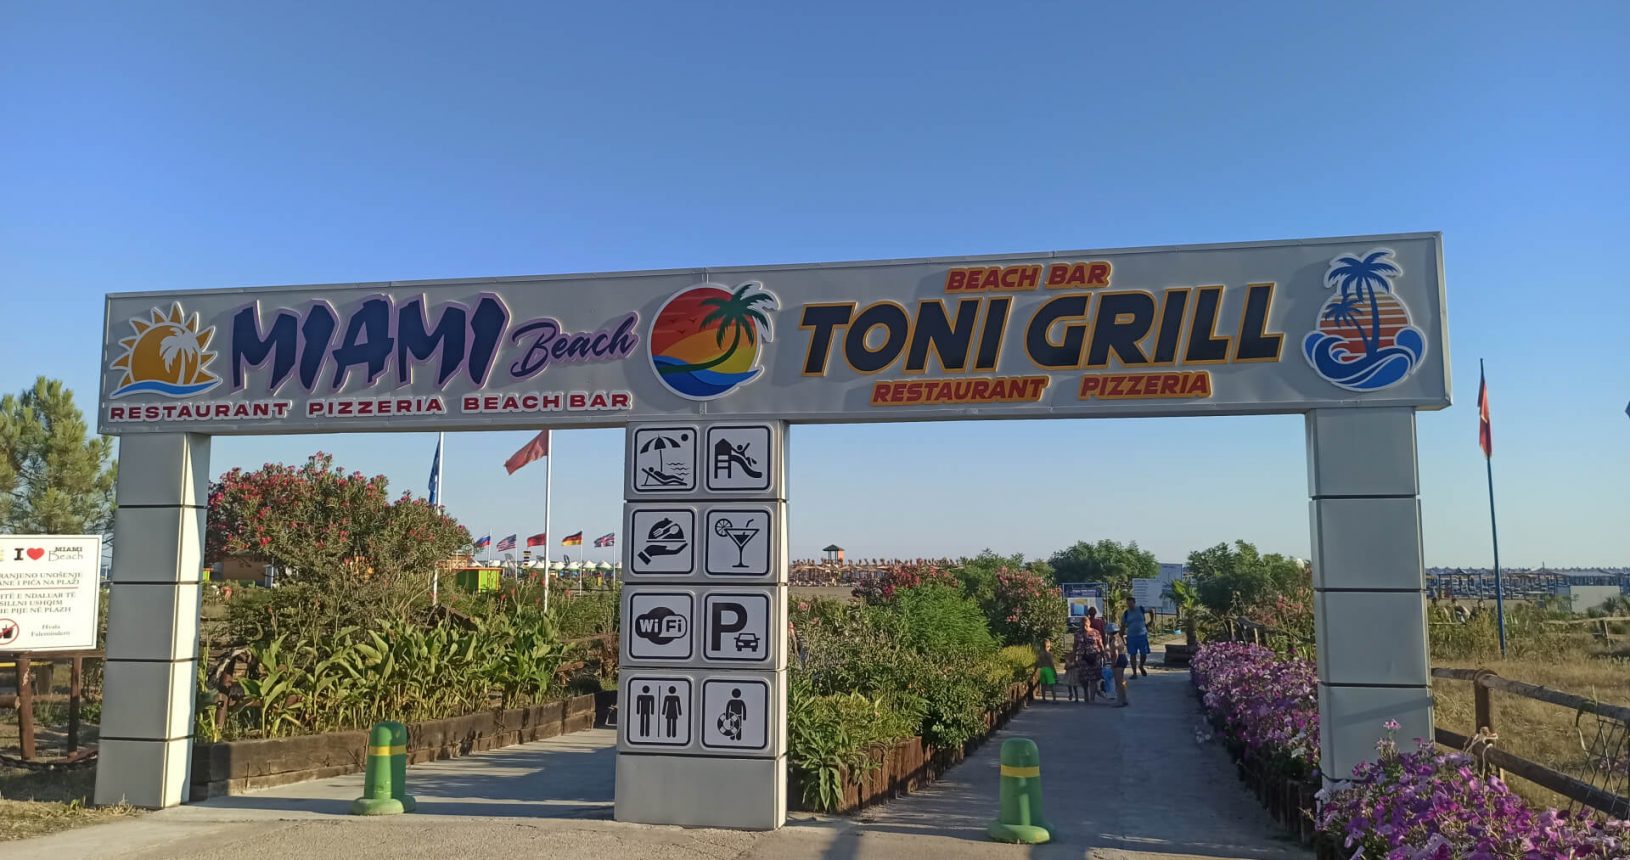 Miami beach and Toni Grill Beach sign and entrance